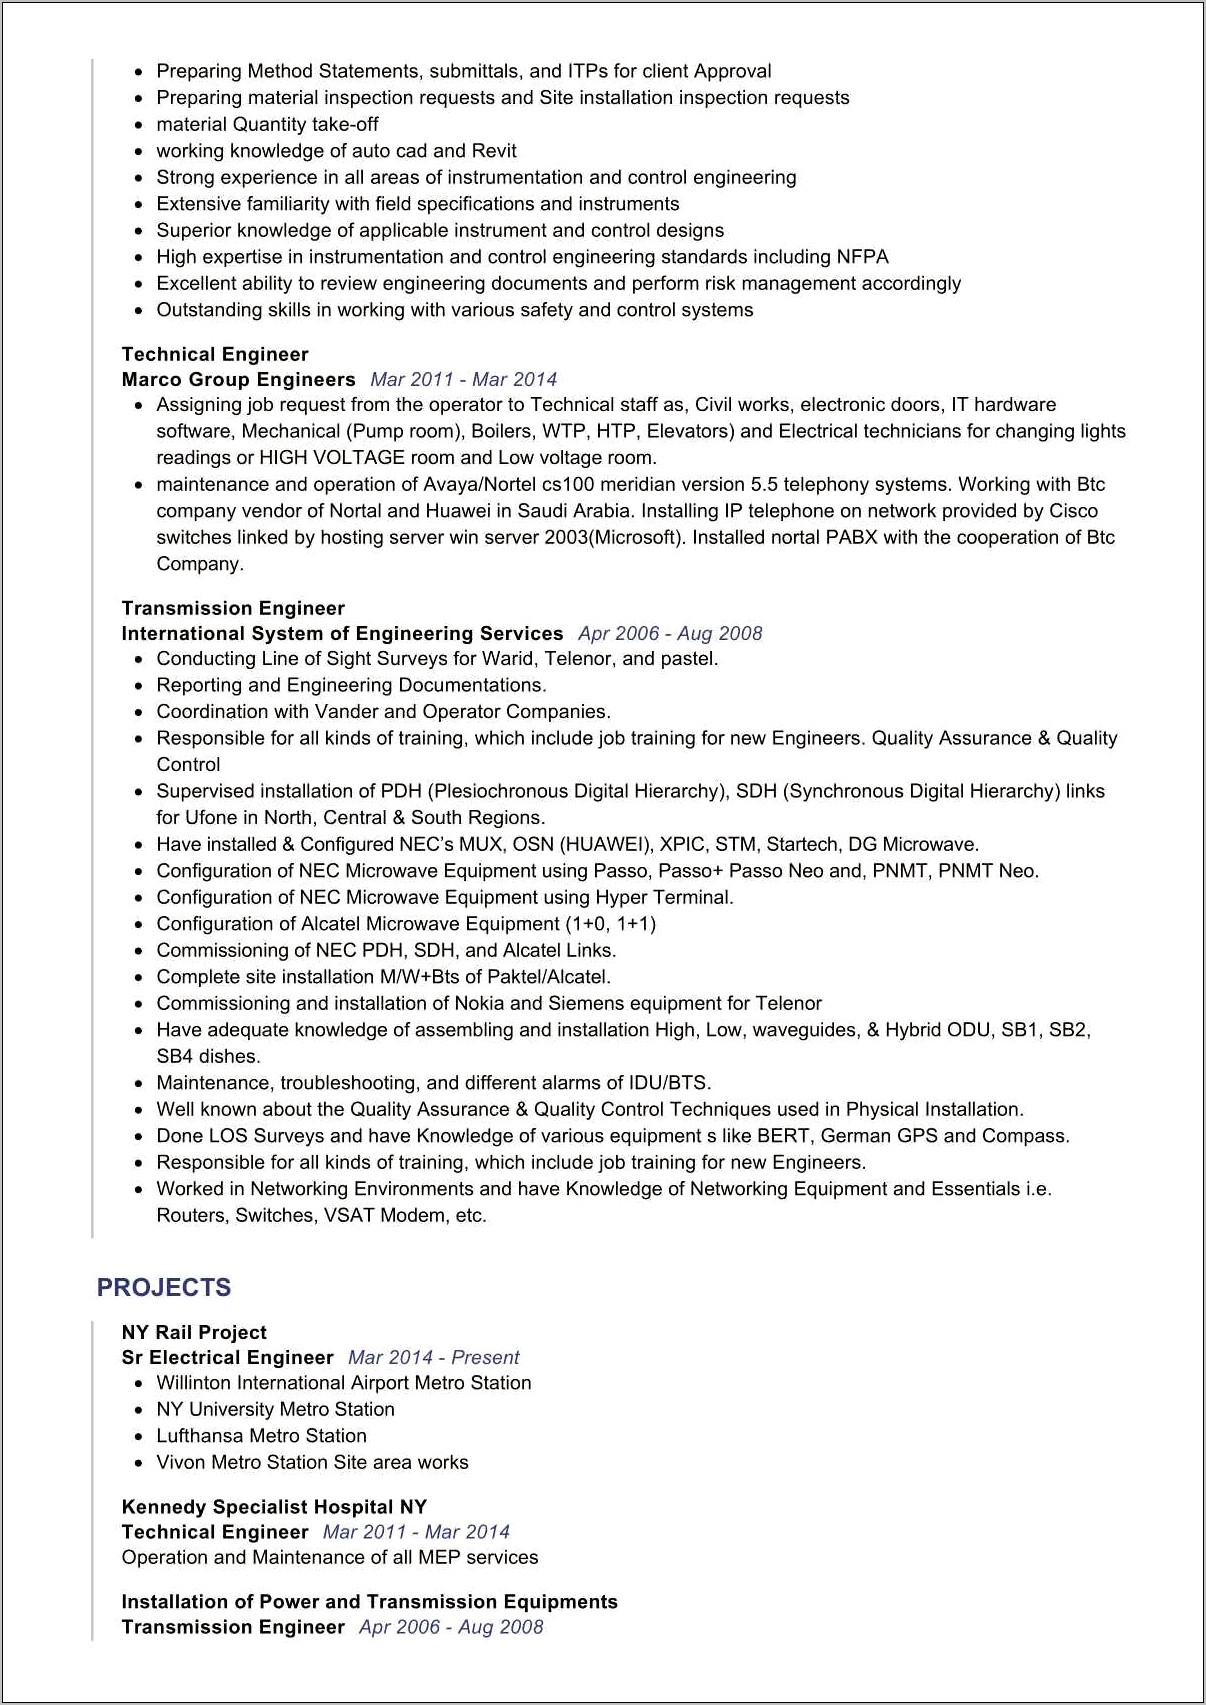 Resume Examples For Low Voltage Electrician